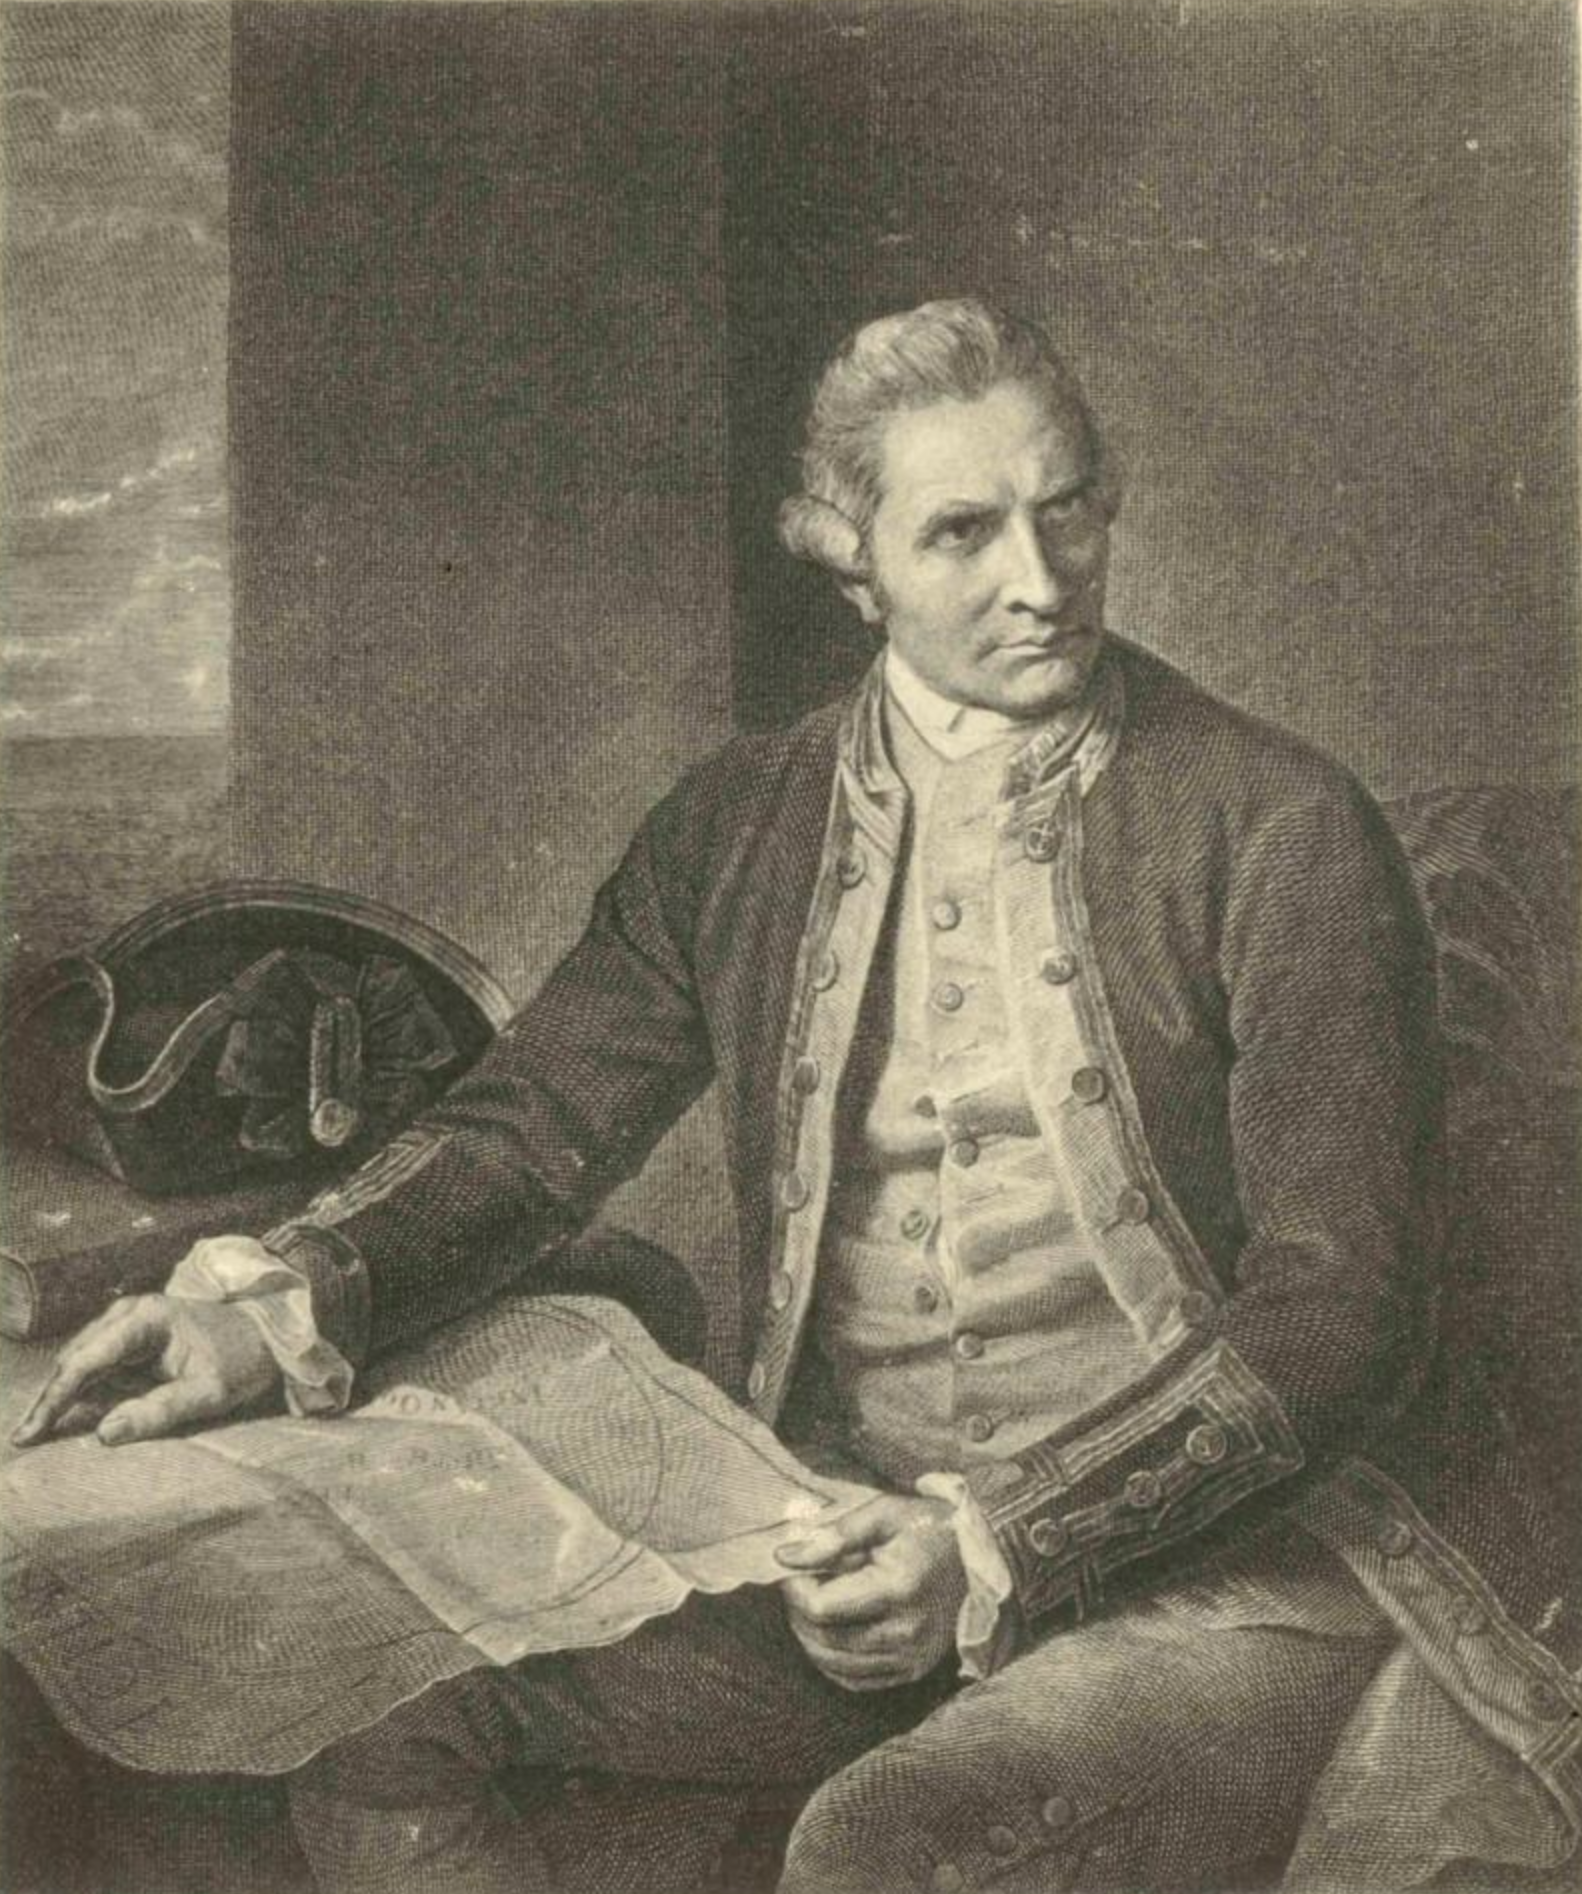 A black and white portrait of Captain James Cook